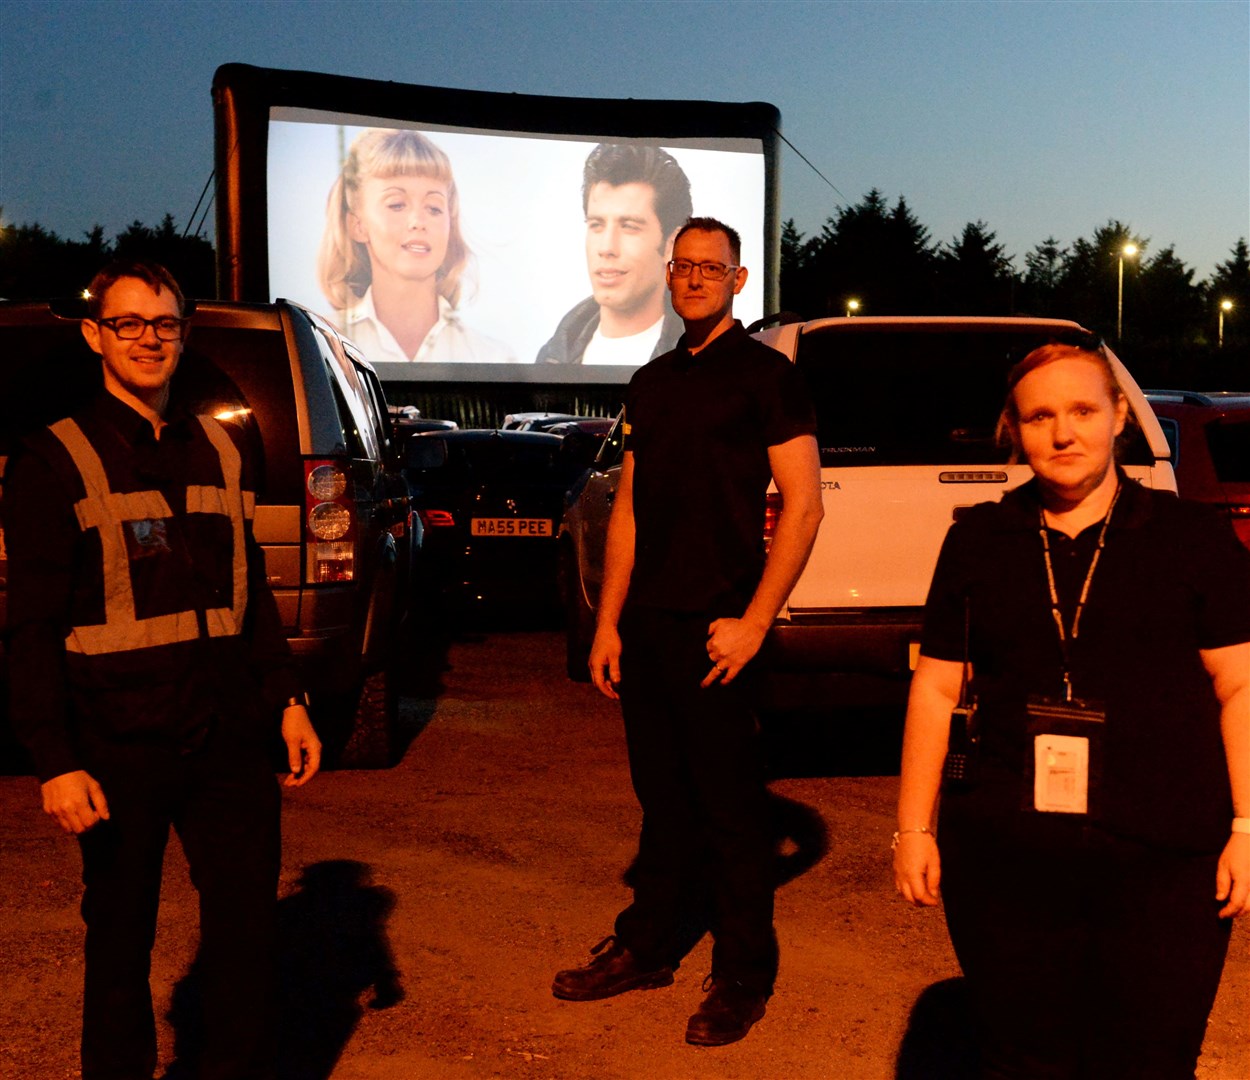 Staff William Porter, Gerard Paton and Sammy Macneill helped make sure everyone got parked where they could see the screen. Picture: James Mackenzie